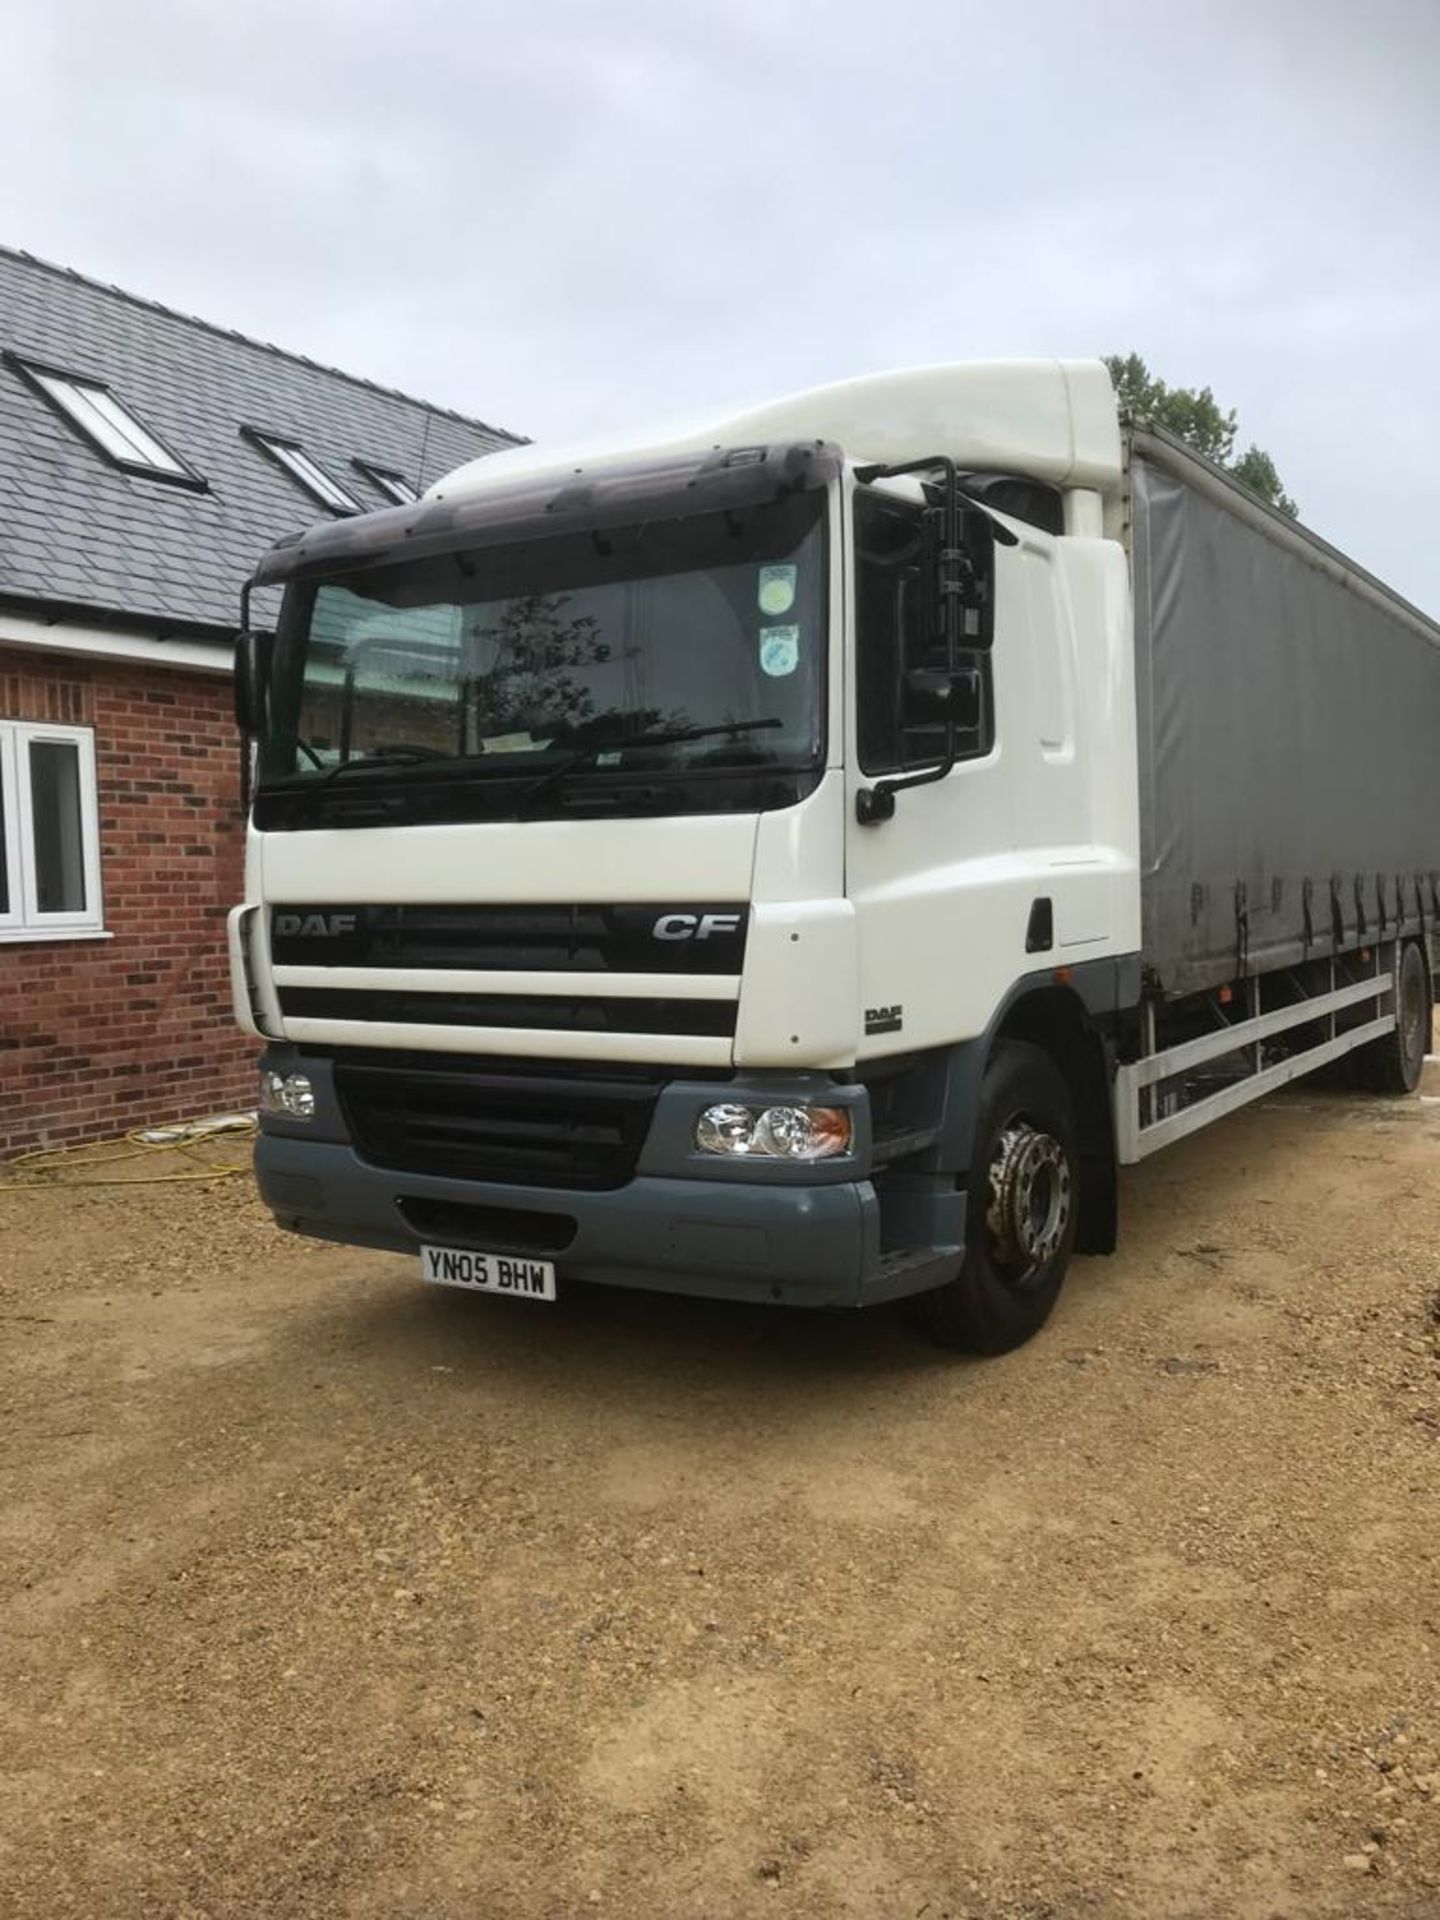 2005 DAF TRUCKS FA CF65.220 ULTRA LOW 275 km CURTAIN SIDE 1 OWNER FROM NEW! 257K SCAFFOLDING?? - Image 2 of 14